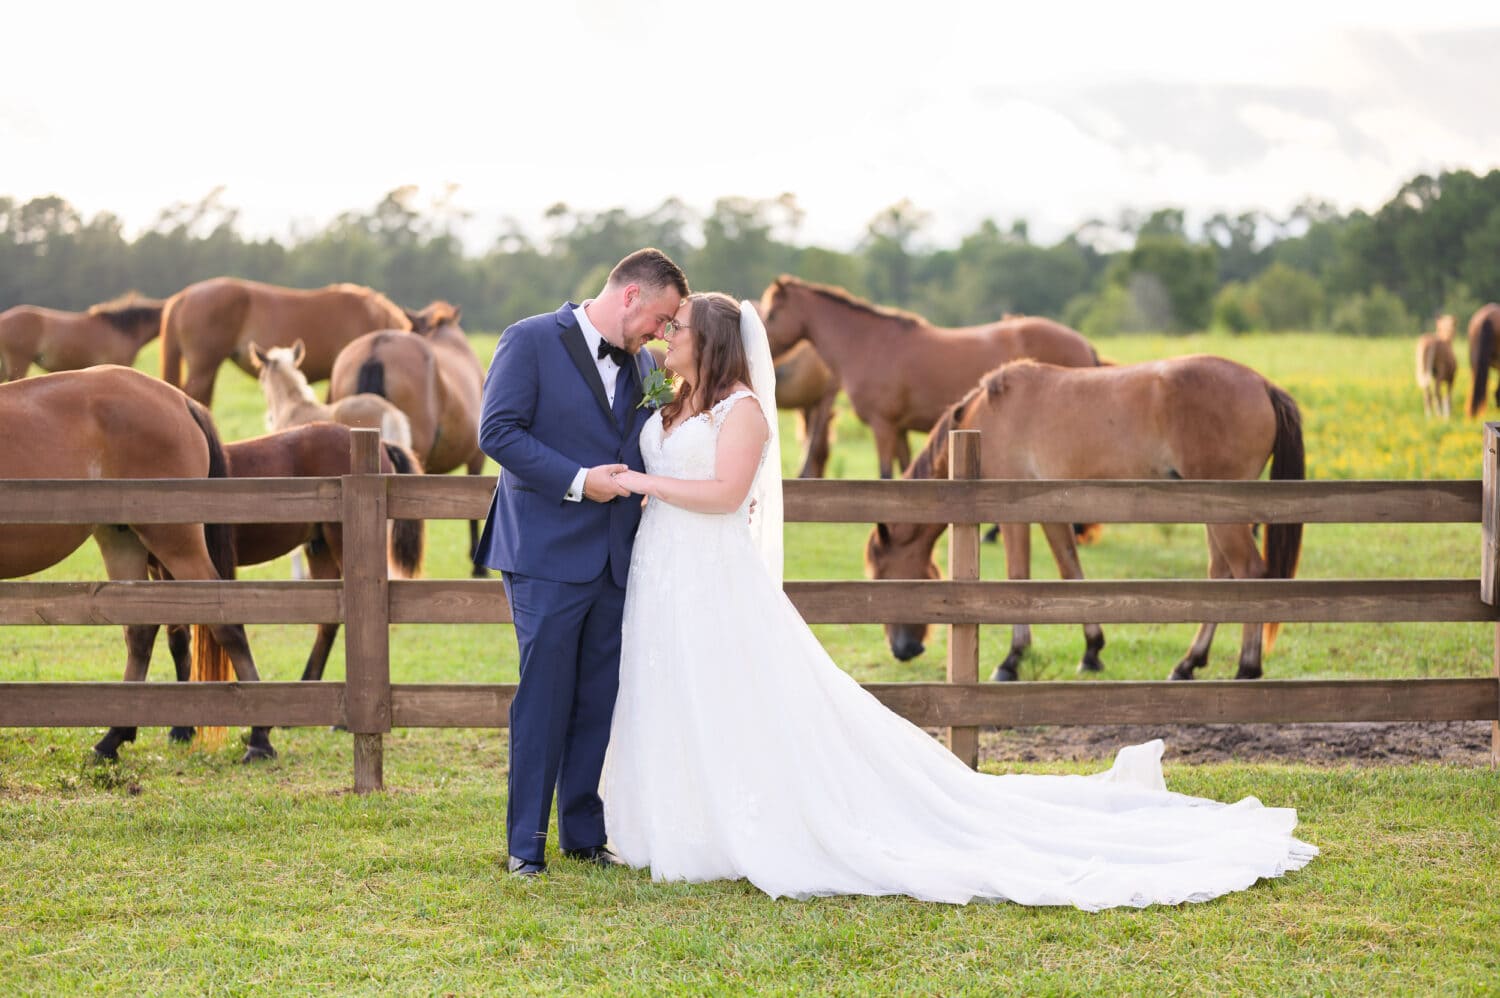 Romance in front of the horses  - Wildhorse at Parker Farms